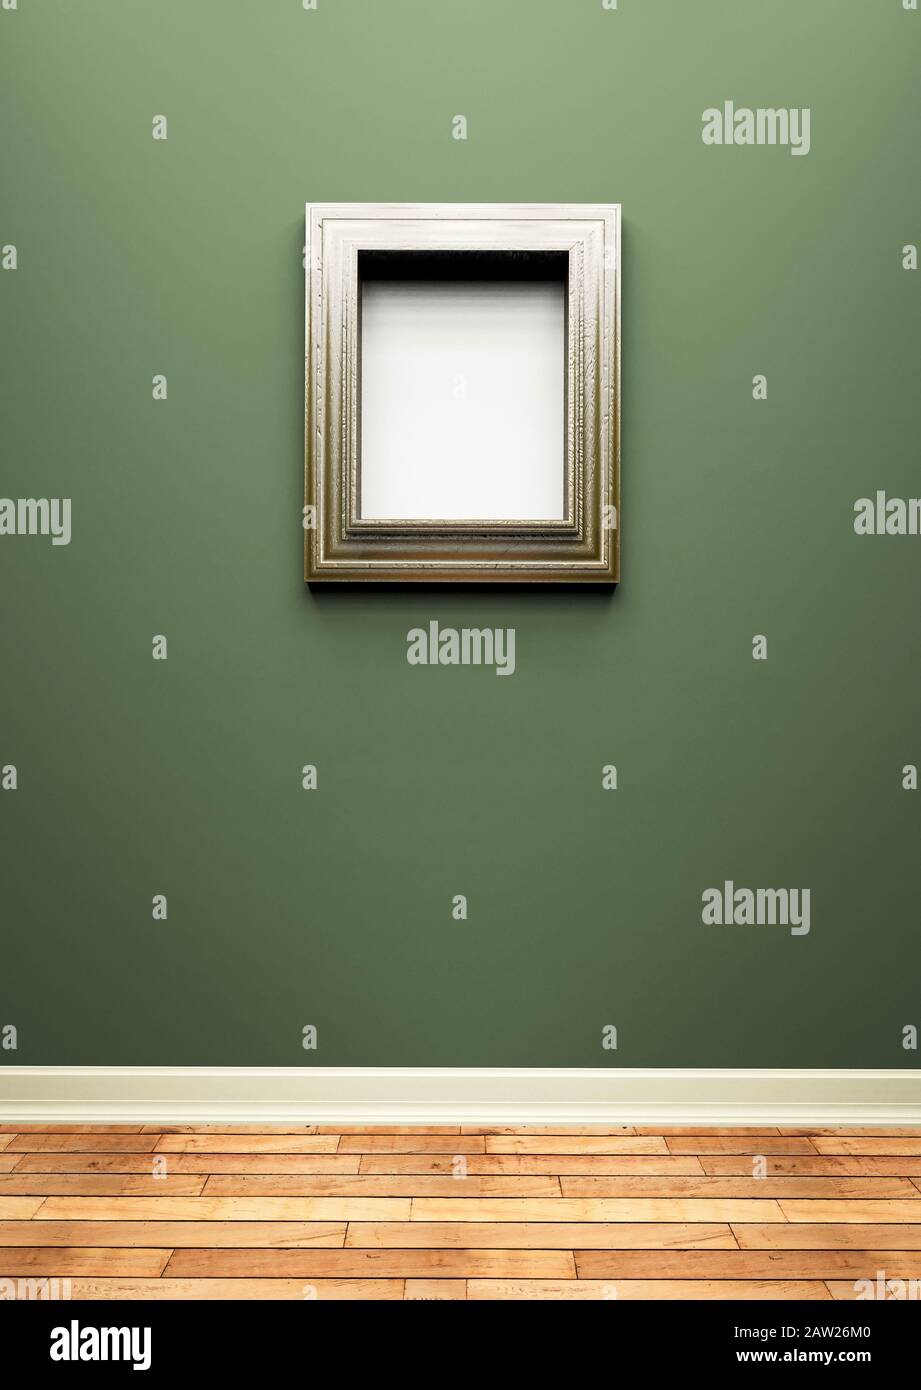 Thick blank metallic picture frame on a green wall Stock Photo